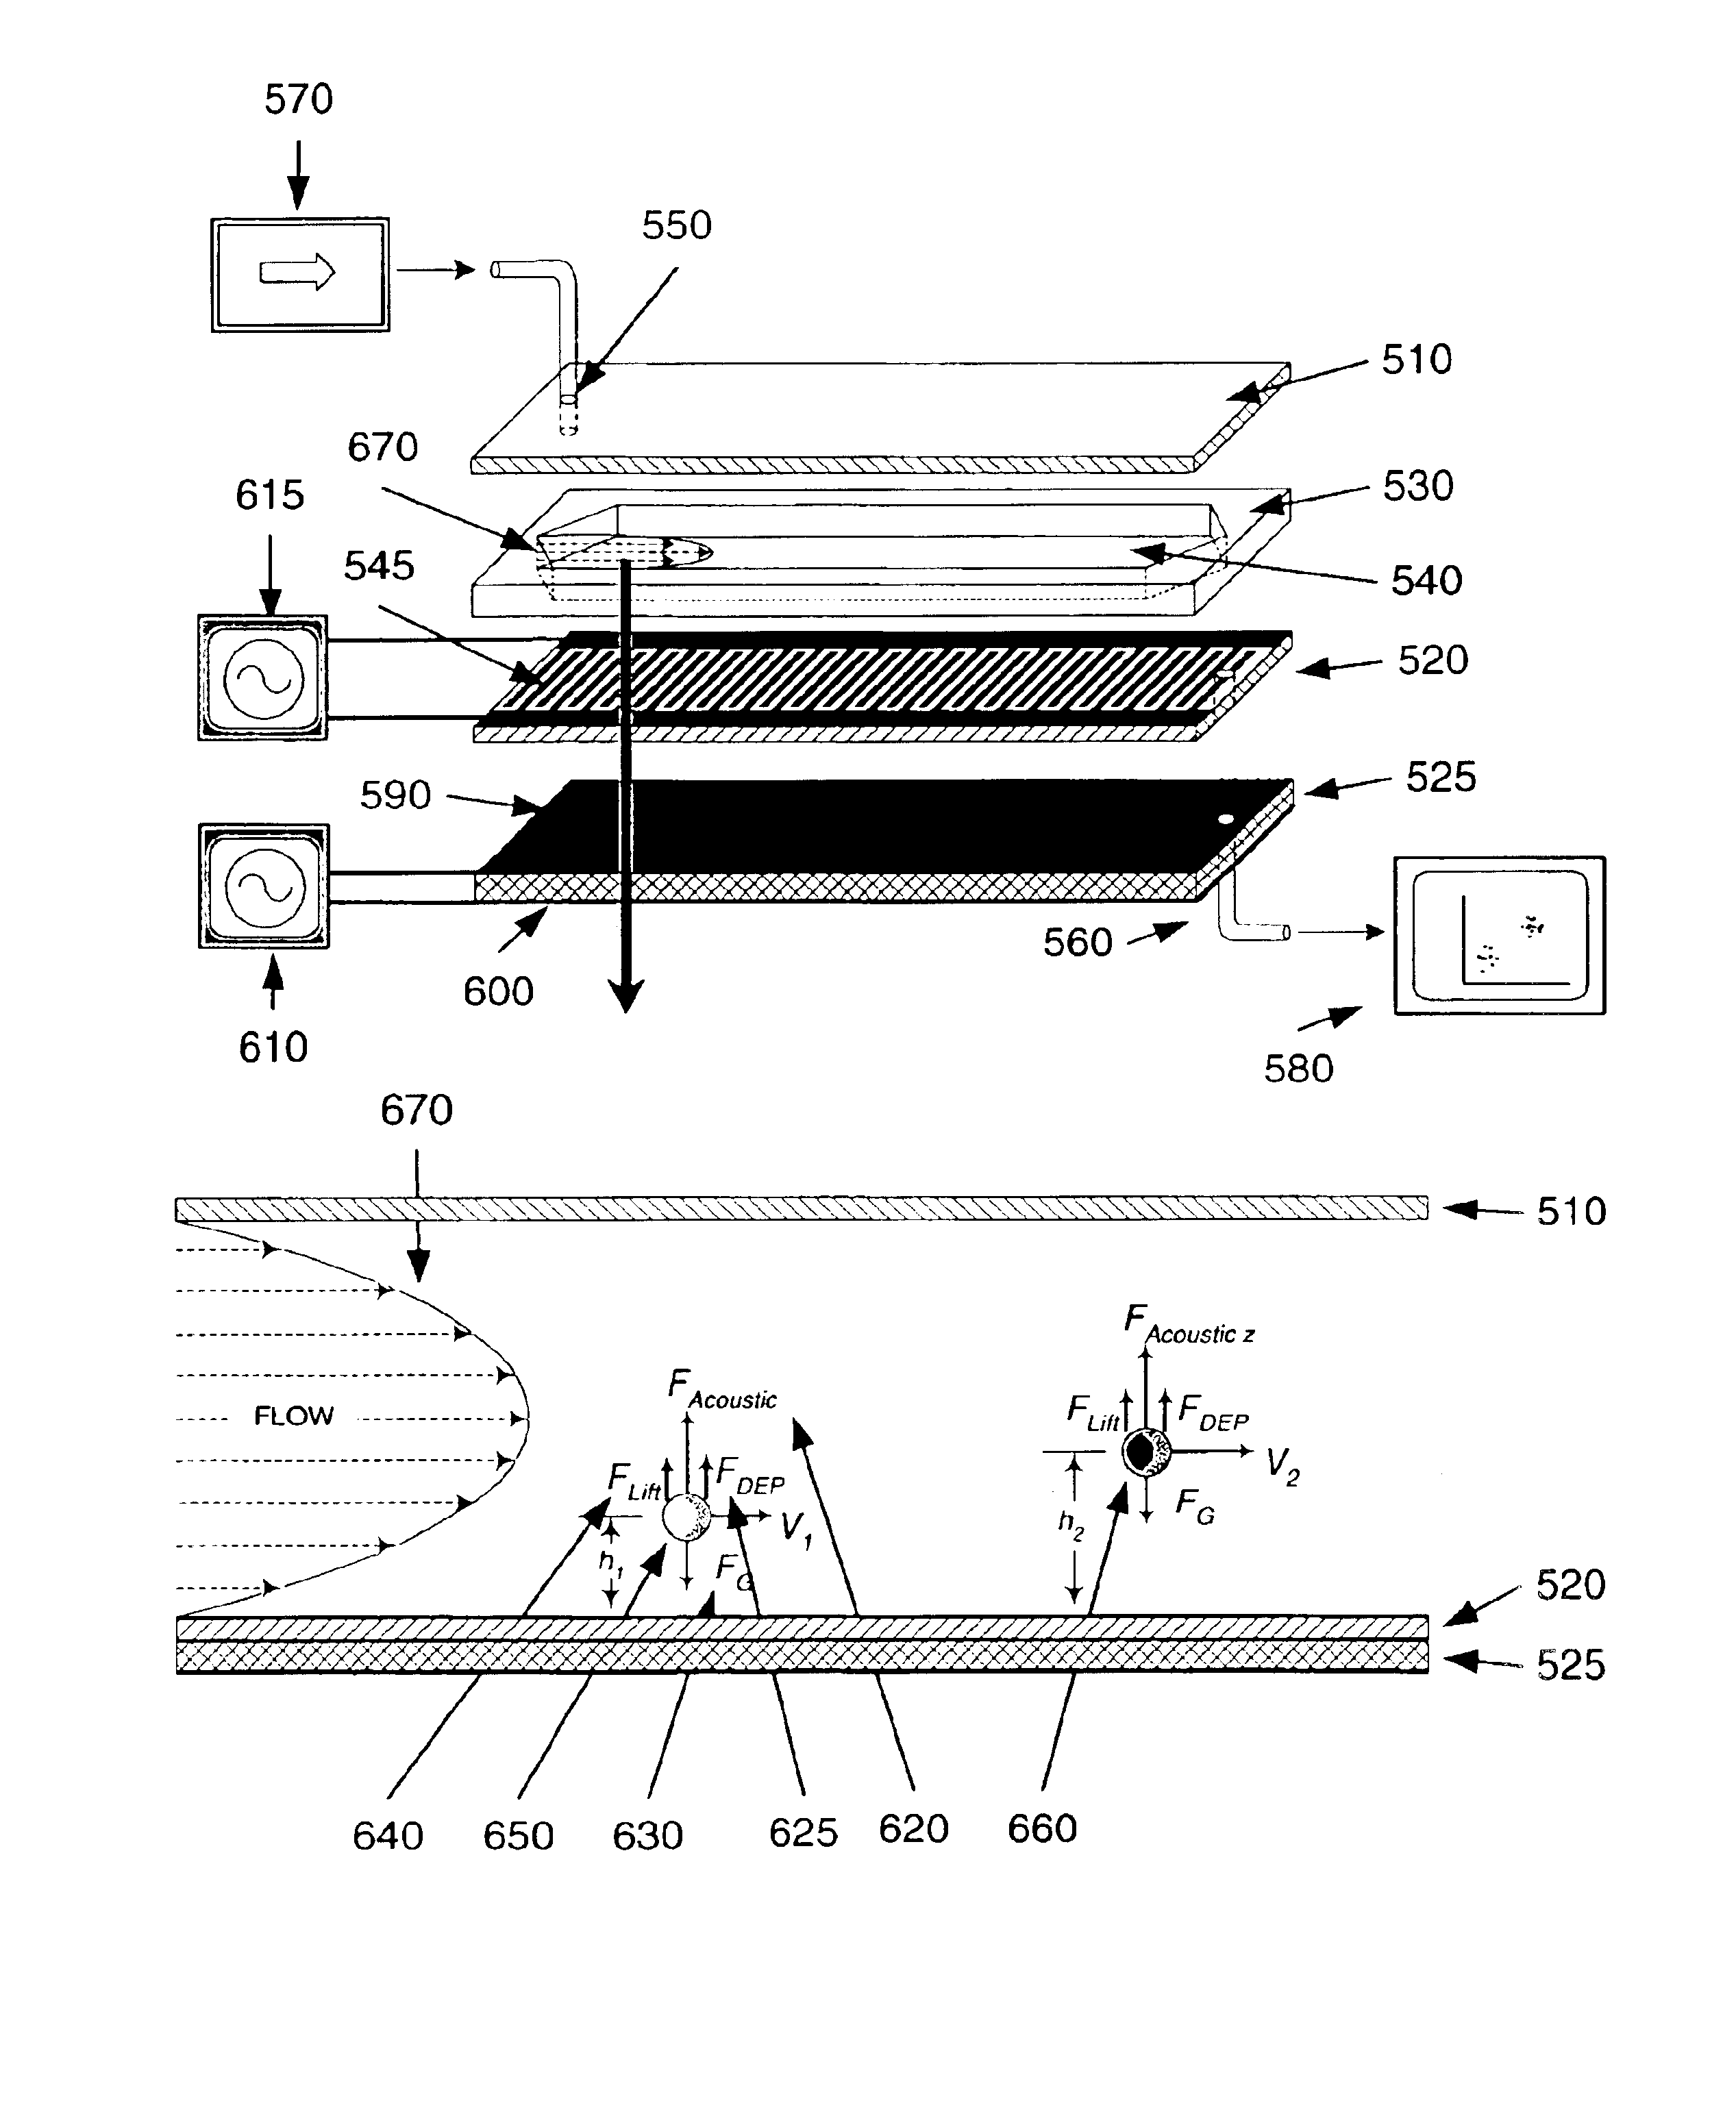 Apparatuses and methods for field flow fractionation of particles using acoustic and other forces